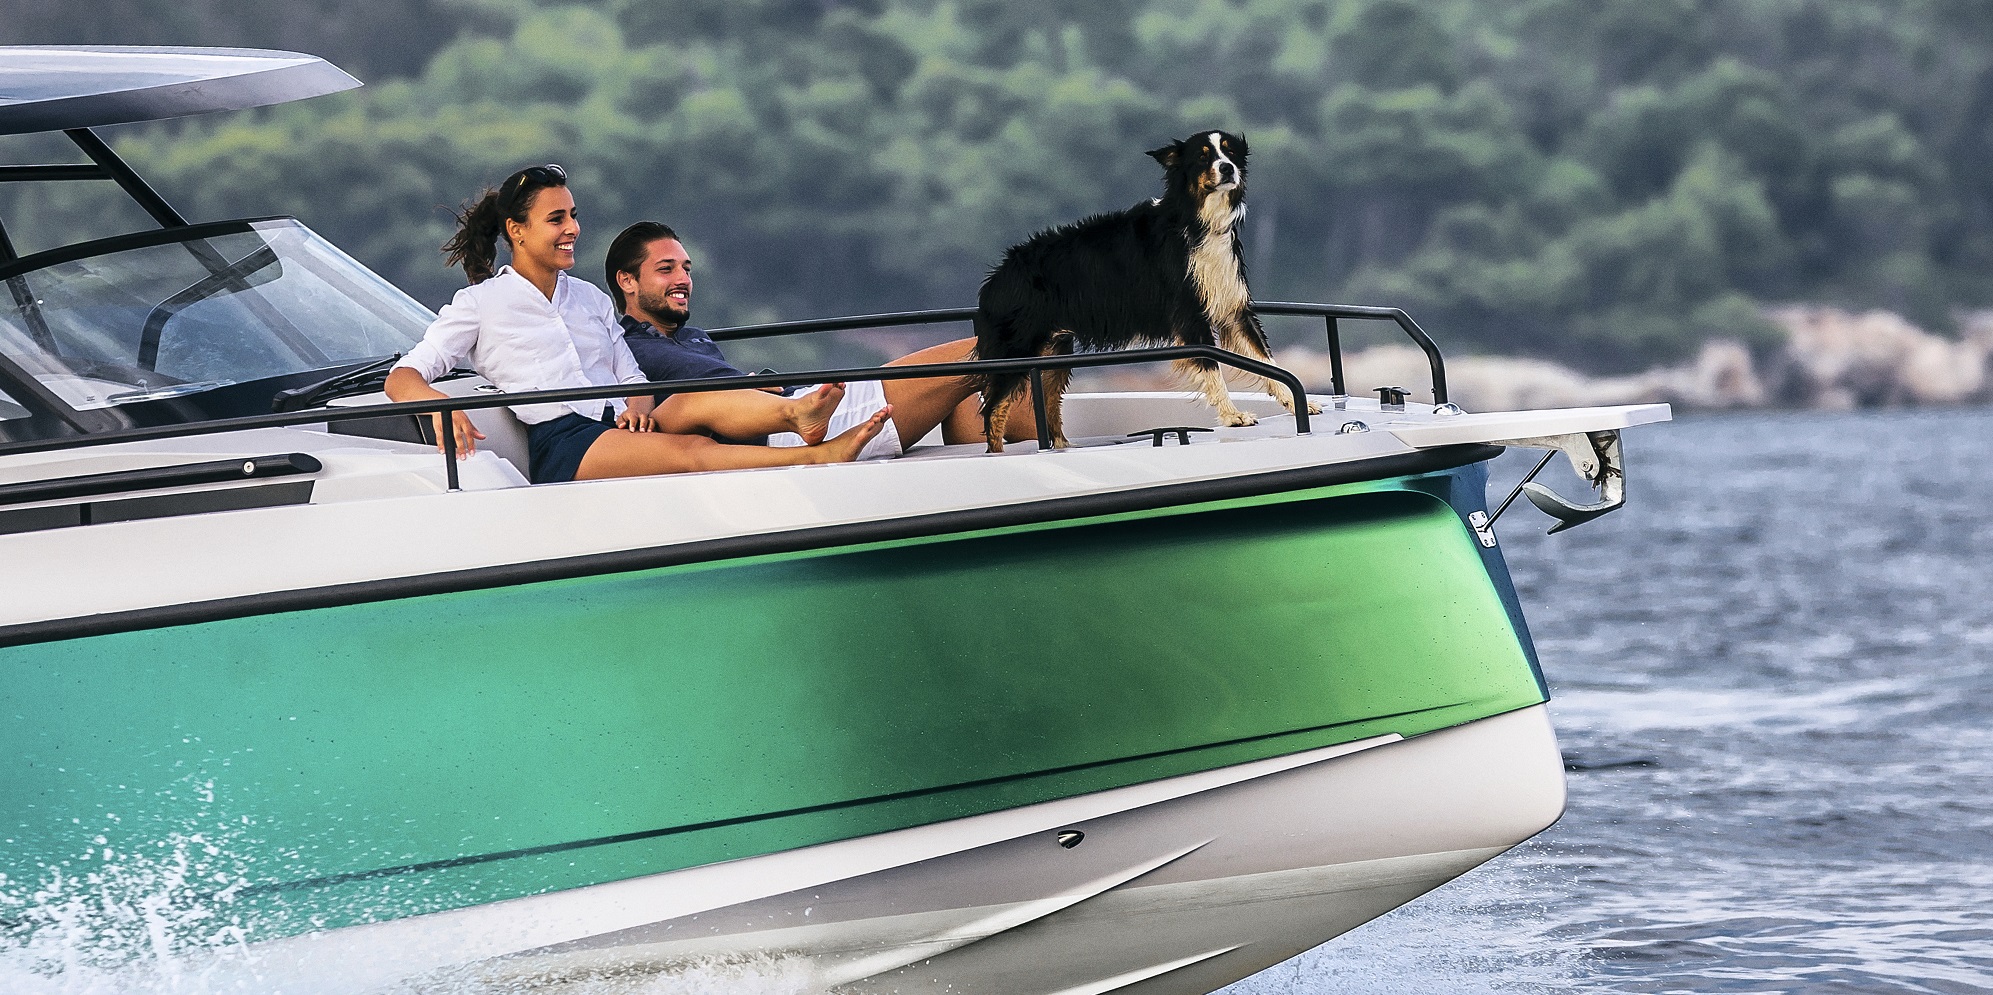 Sailing with Pets 101: The Dos and Don'ts On Board